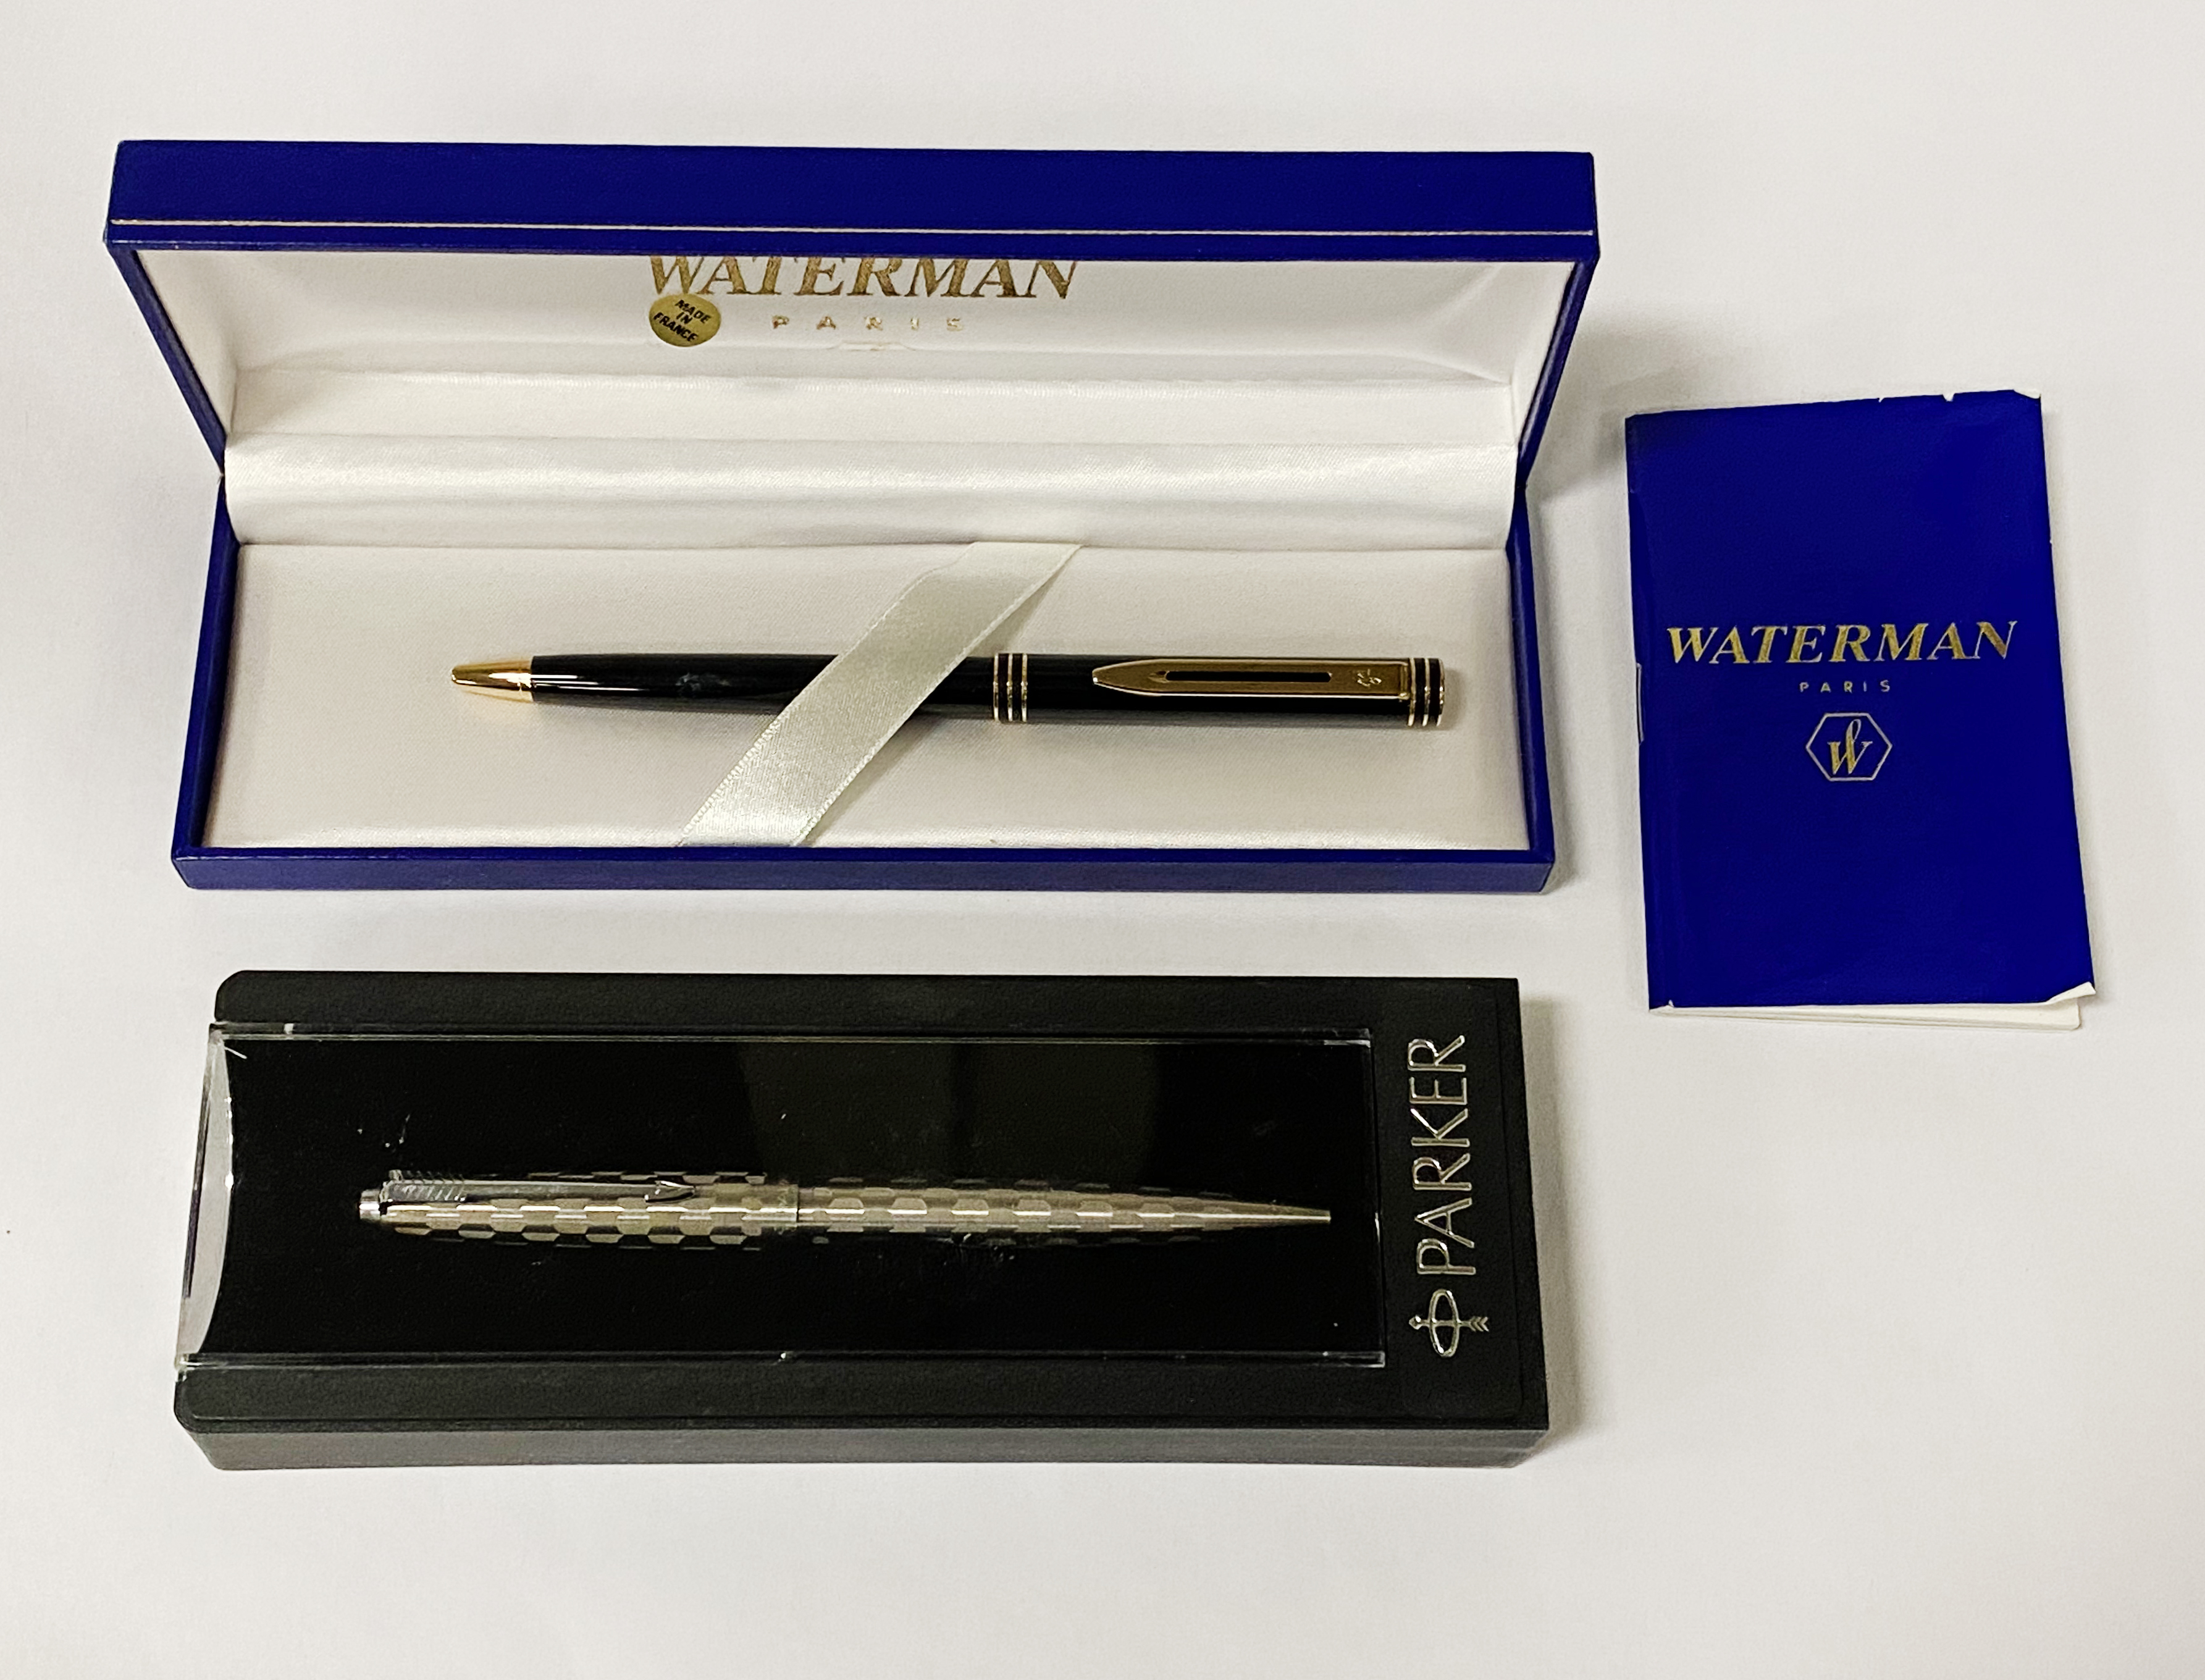 WATERMAN ROLLER BALL PEN IN ORIGINAL BOX WITH PAPERS WITH A PARKER HARLEQUIN PEN